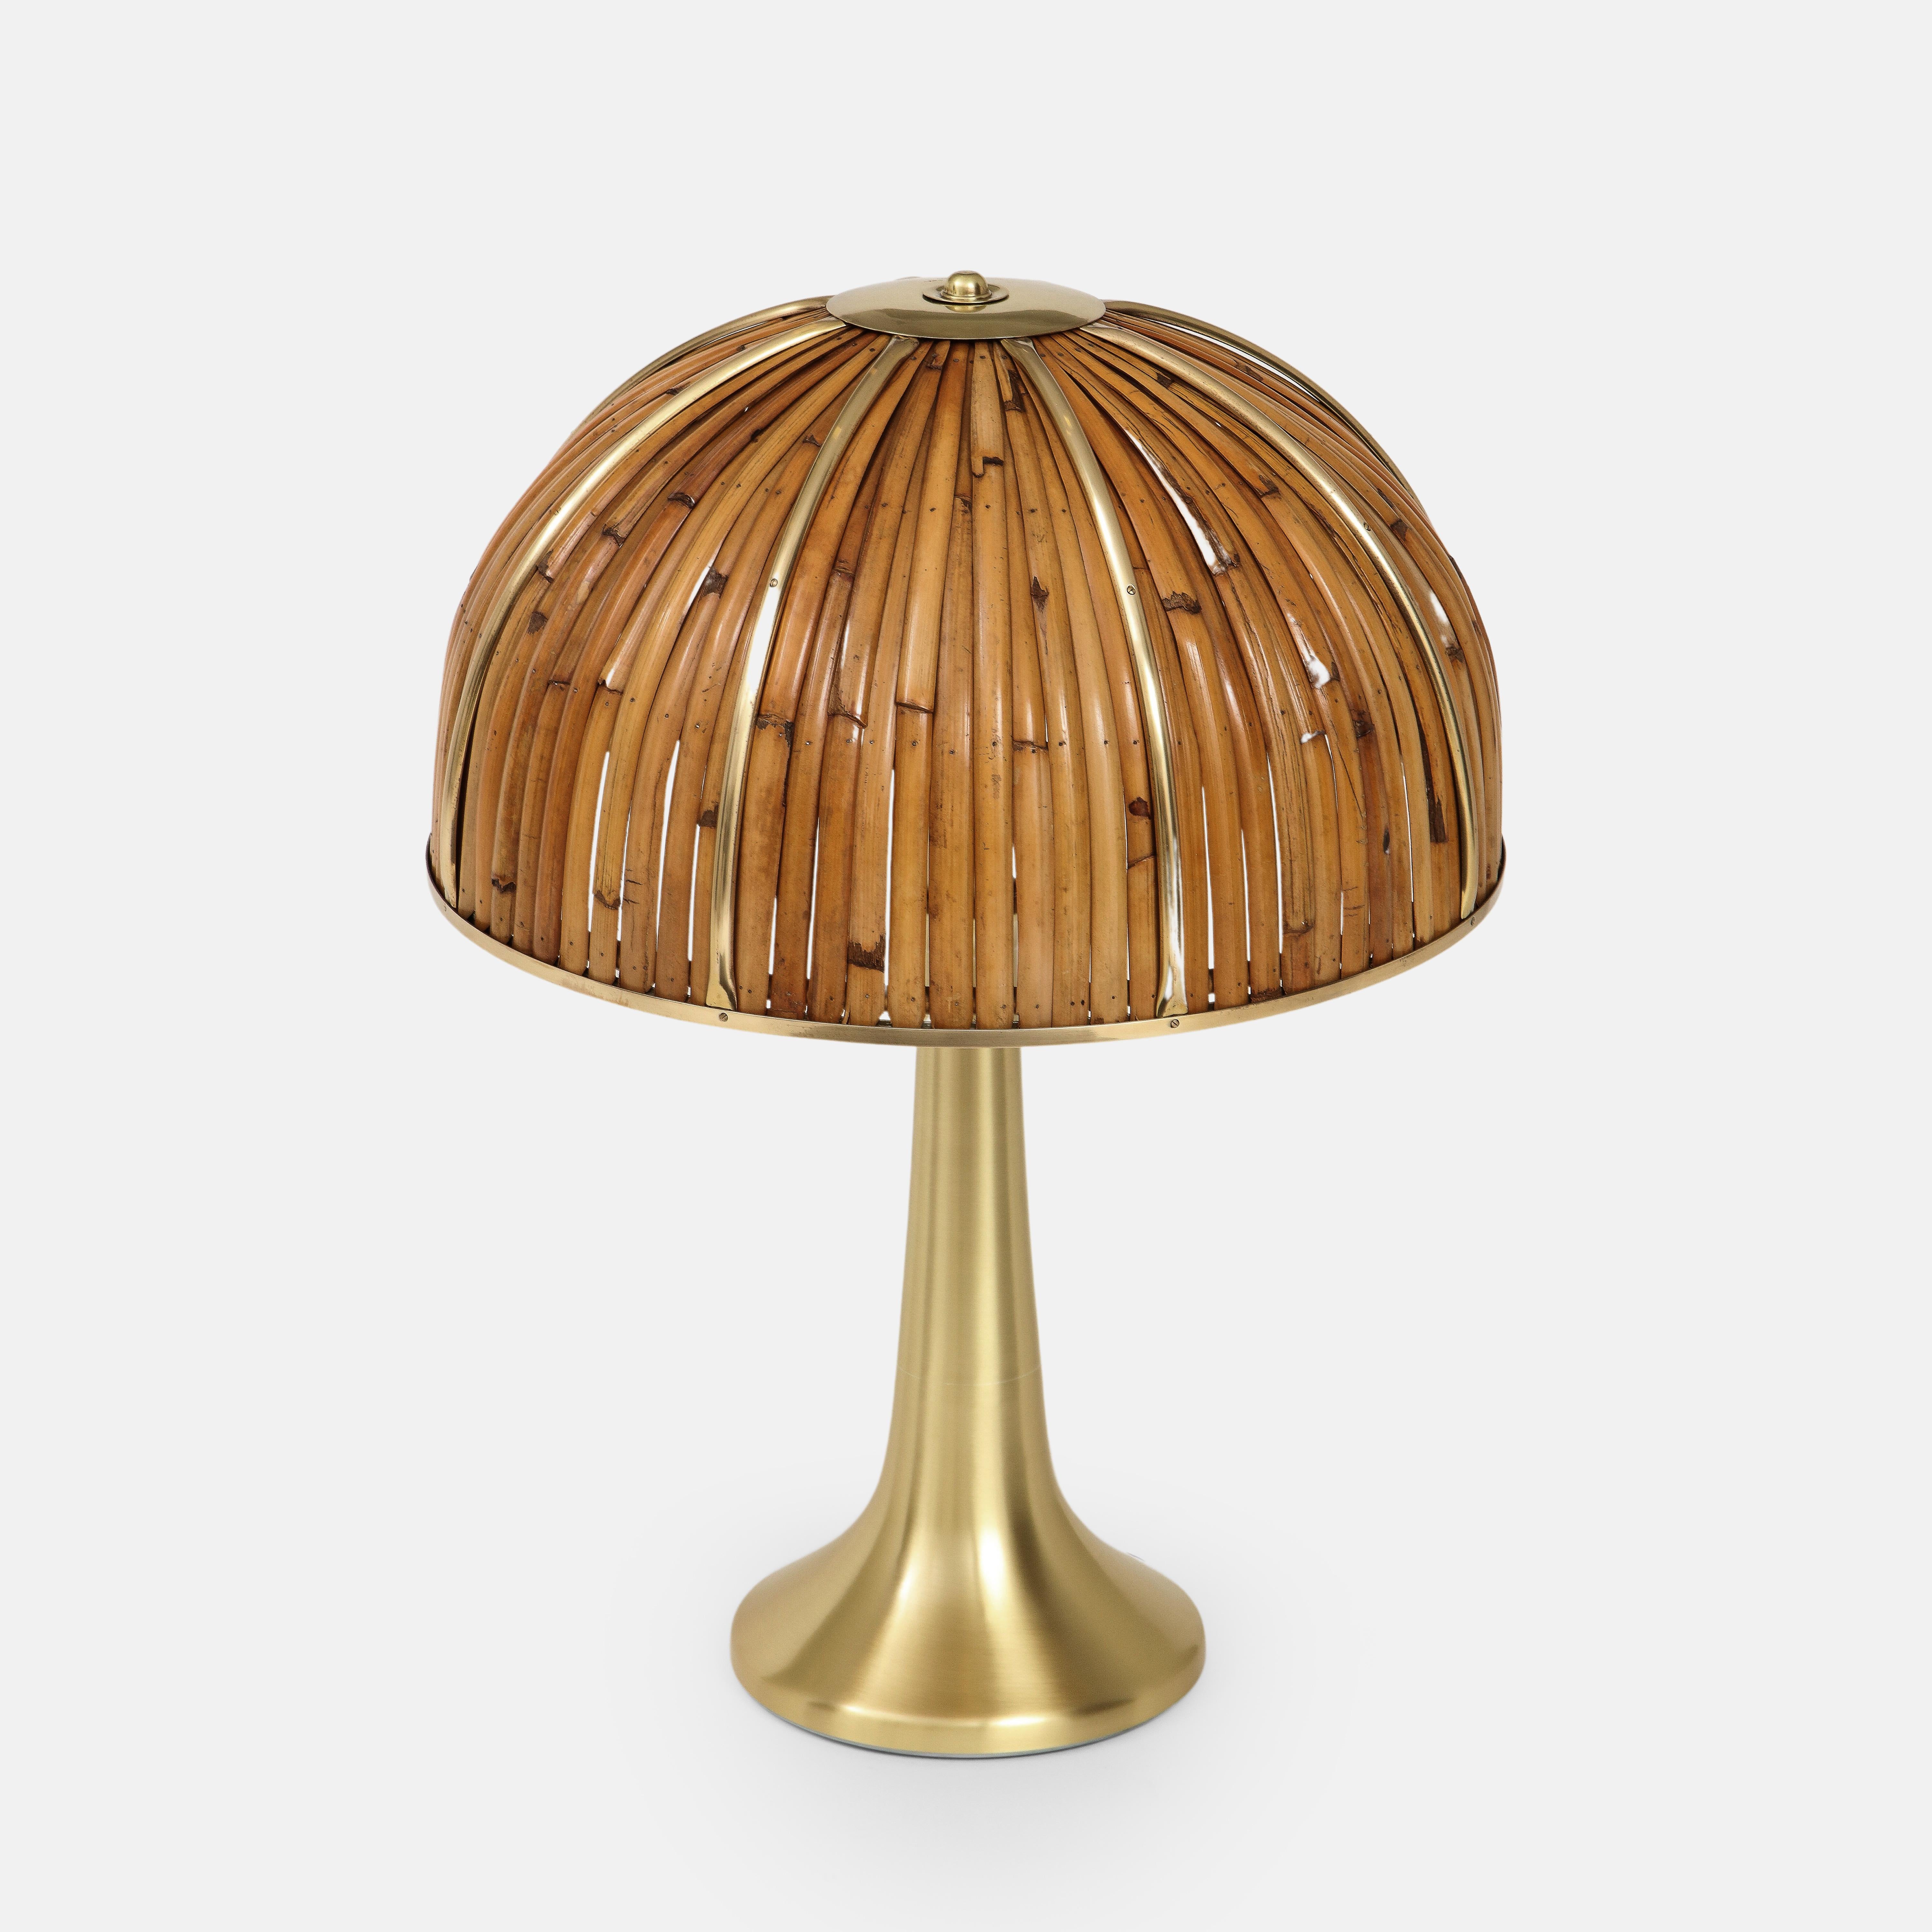 Lacquered Gabriella Crespi Rare Large 'Fungo' Table Lamp in Bamboo and Brass, Italy, 1970s